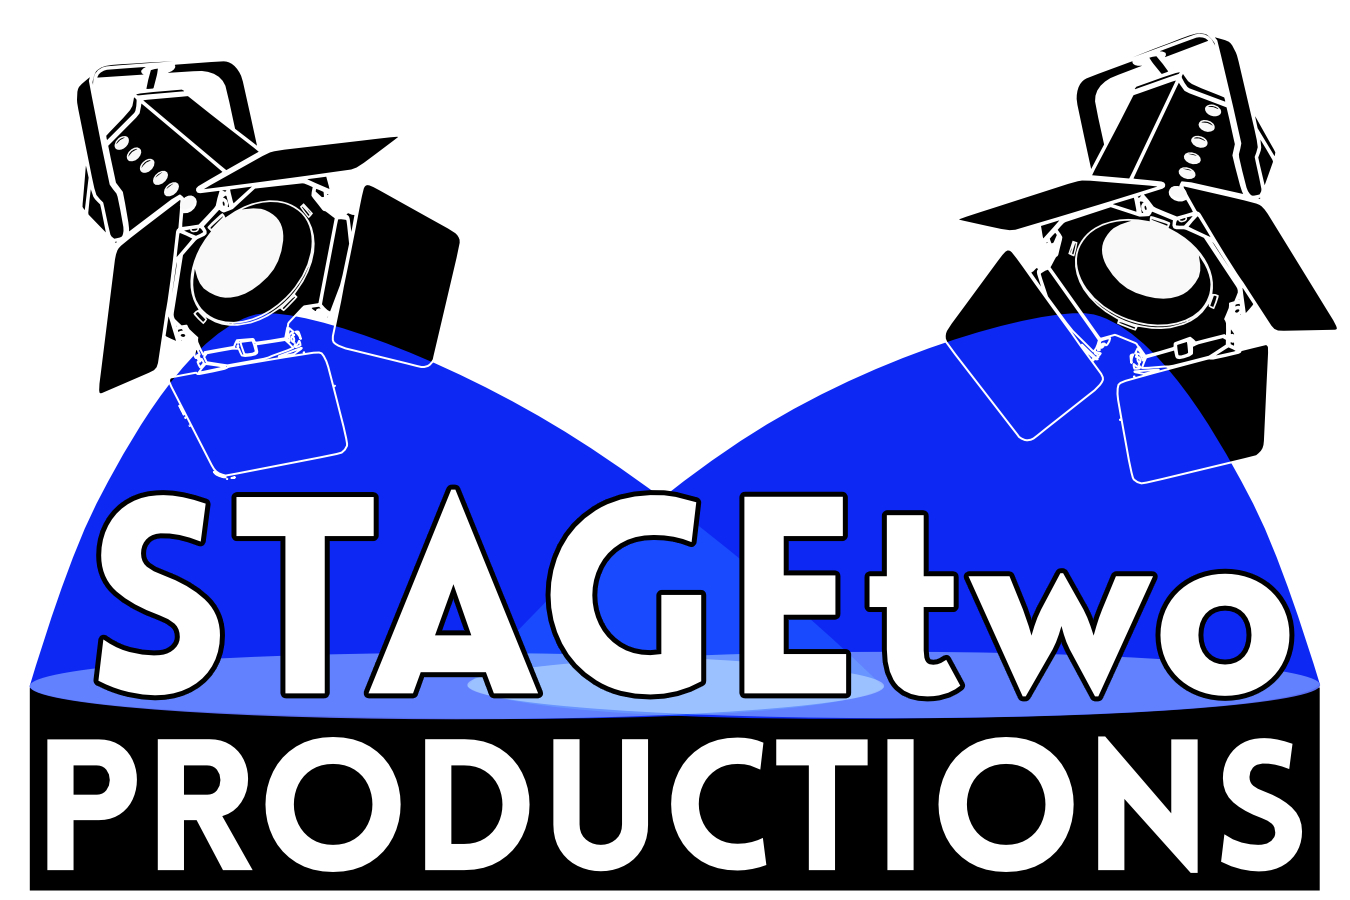 STAGEtwo Productions logo